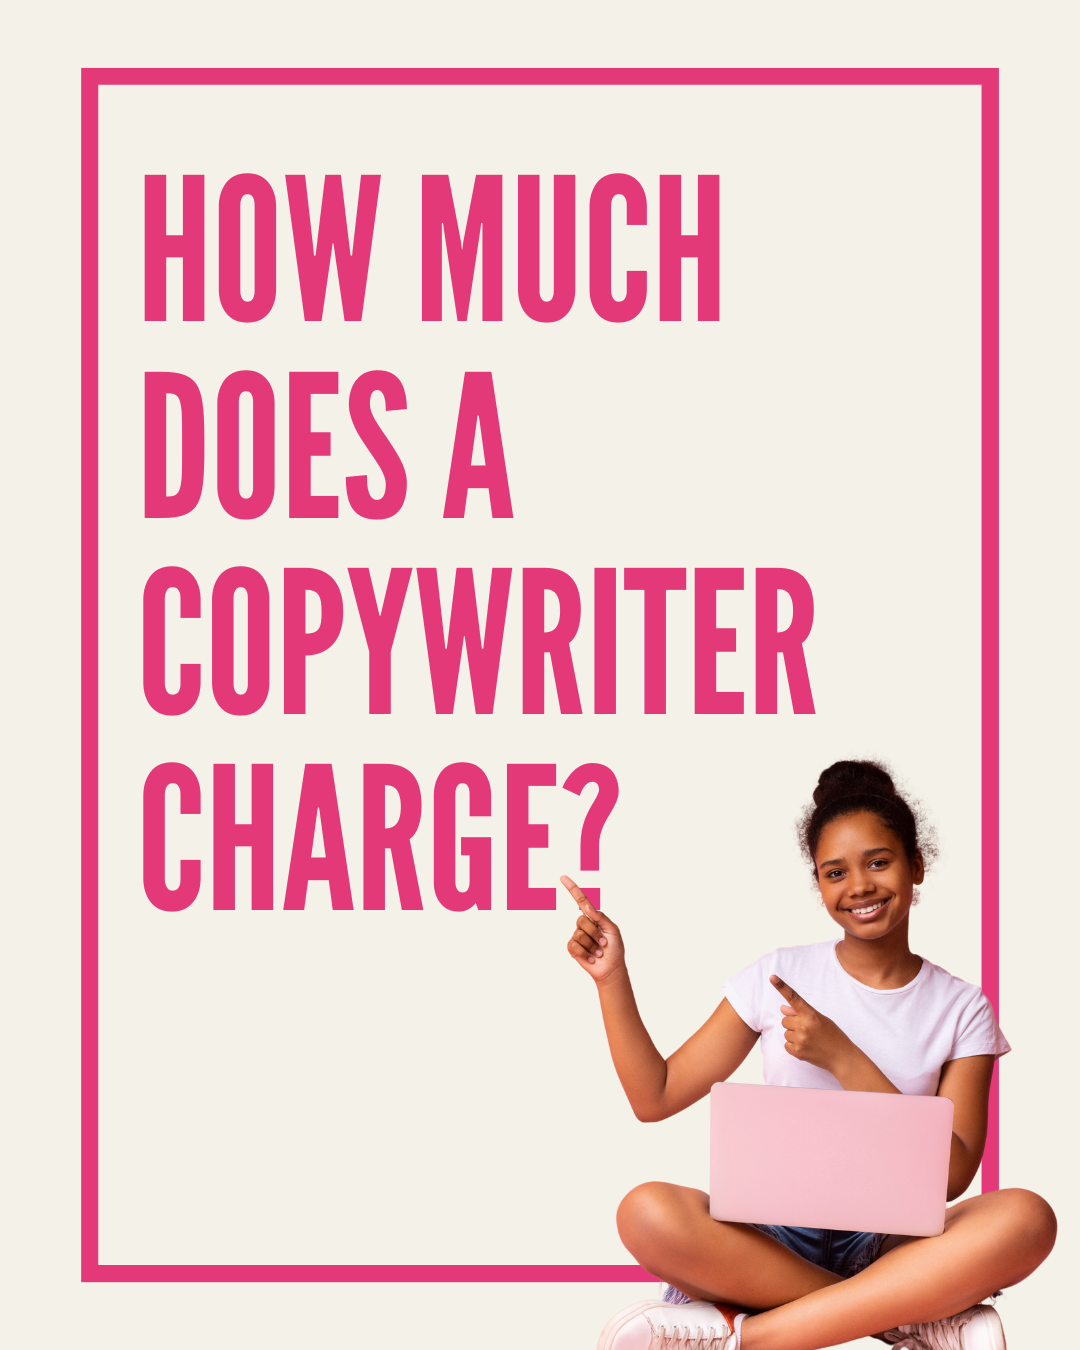 How much does it cost to hire a copywriter?